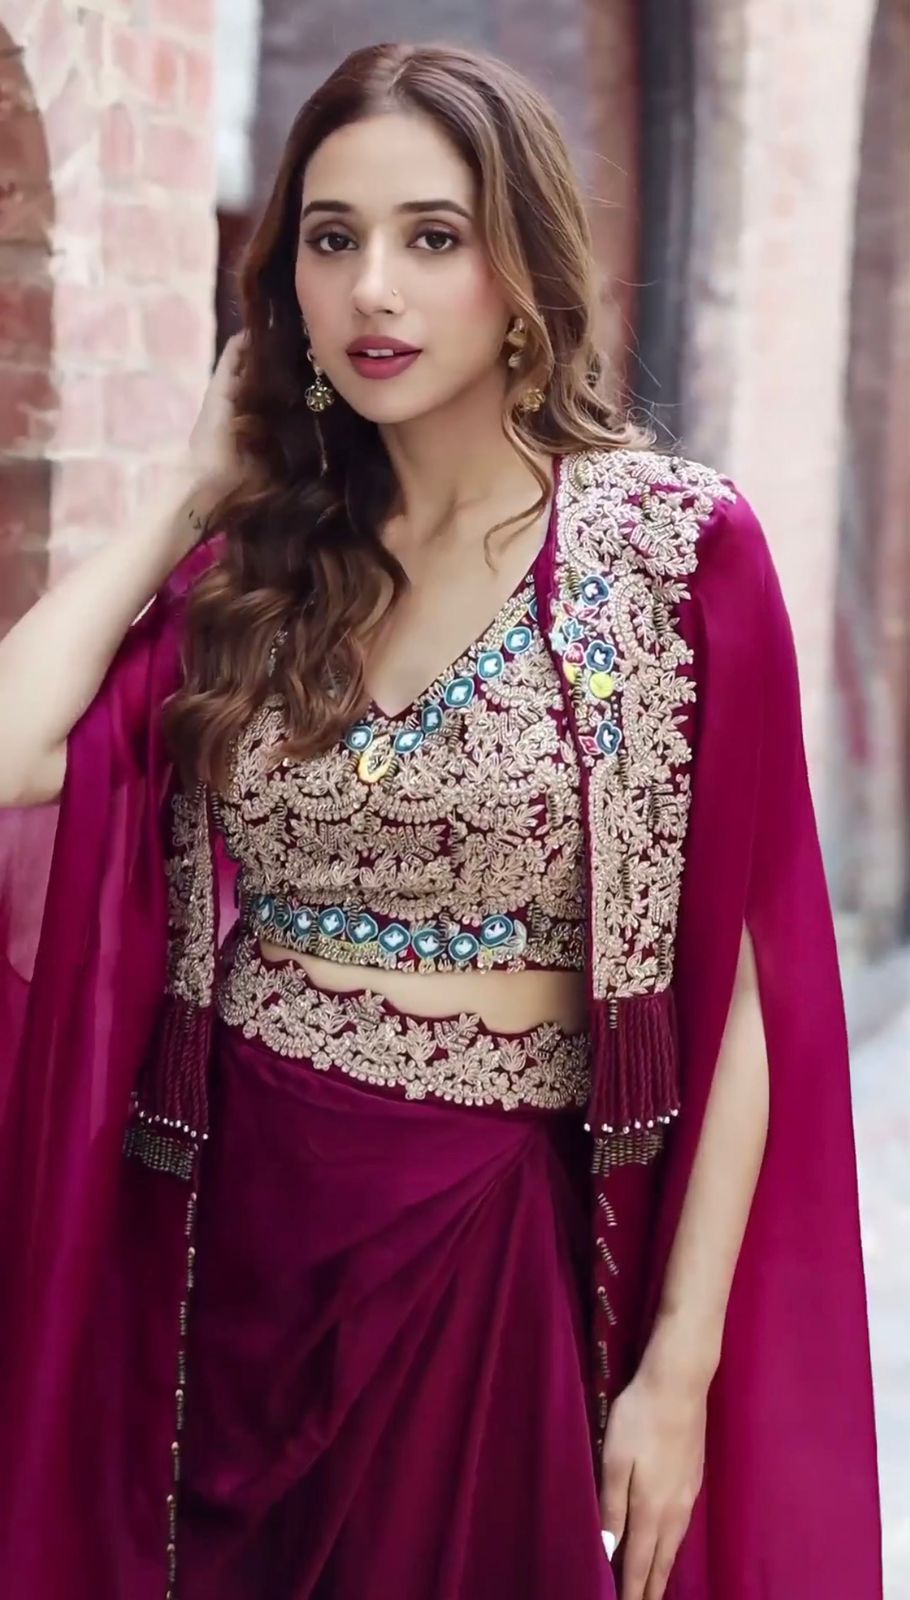 Buy Best Indo Western Outfit Online in India – Joshindia